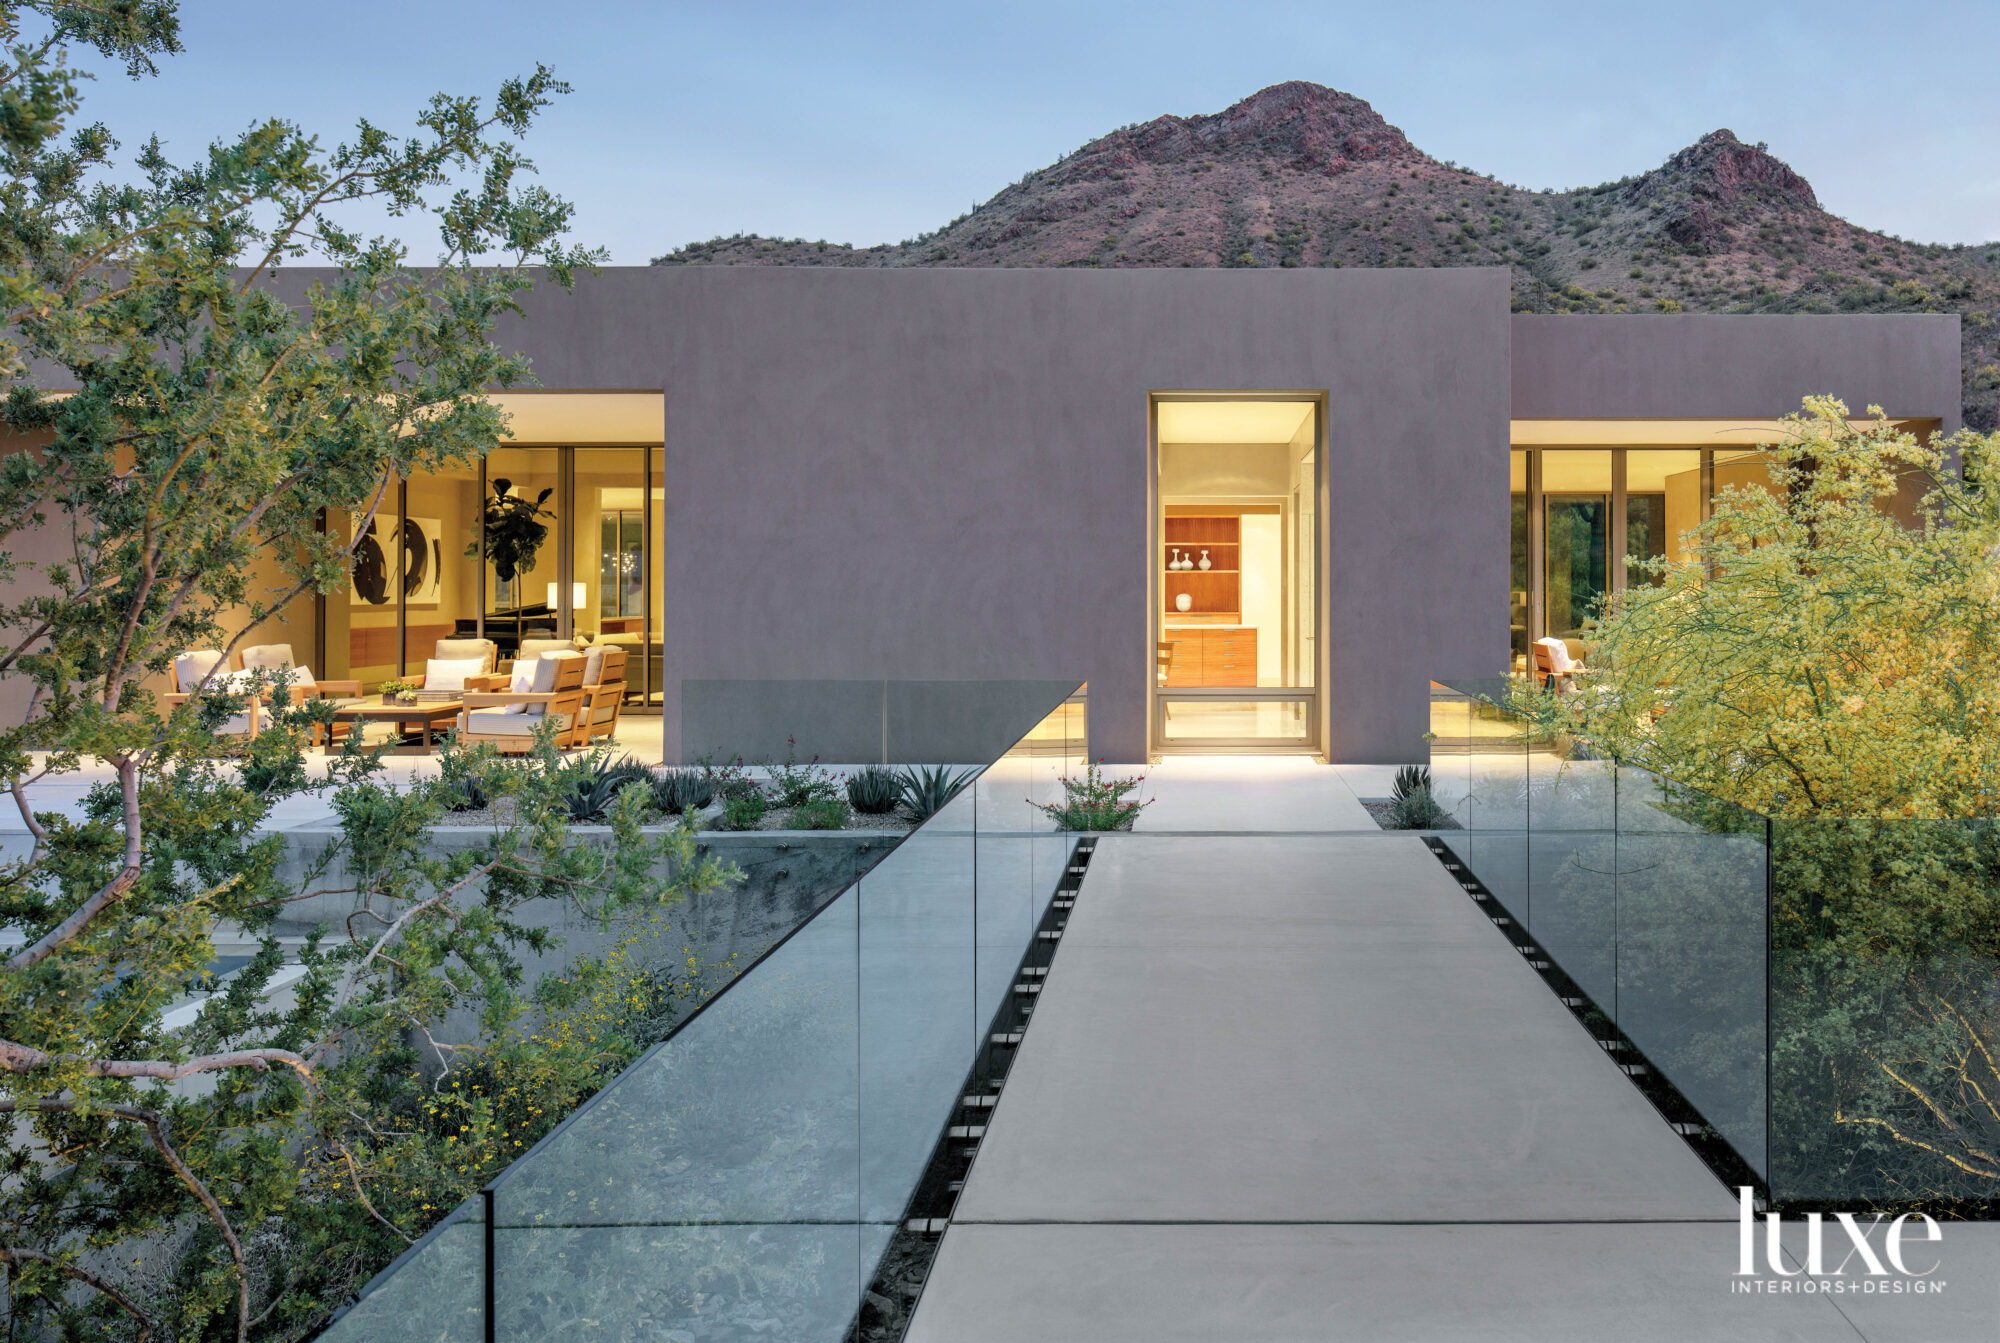 Tucked Away Into A Canyon, This Arizona Home Showcases The Desert From